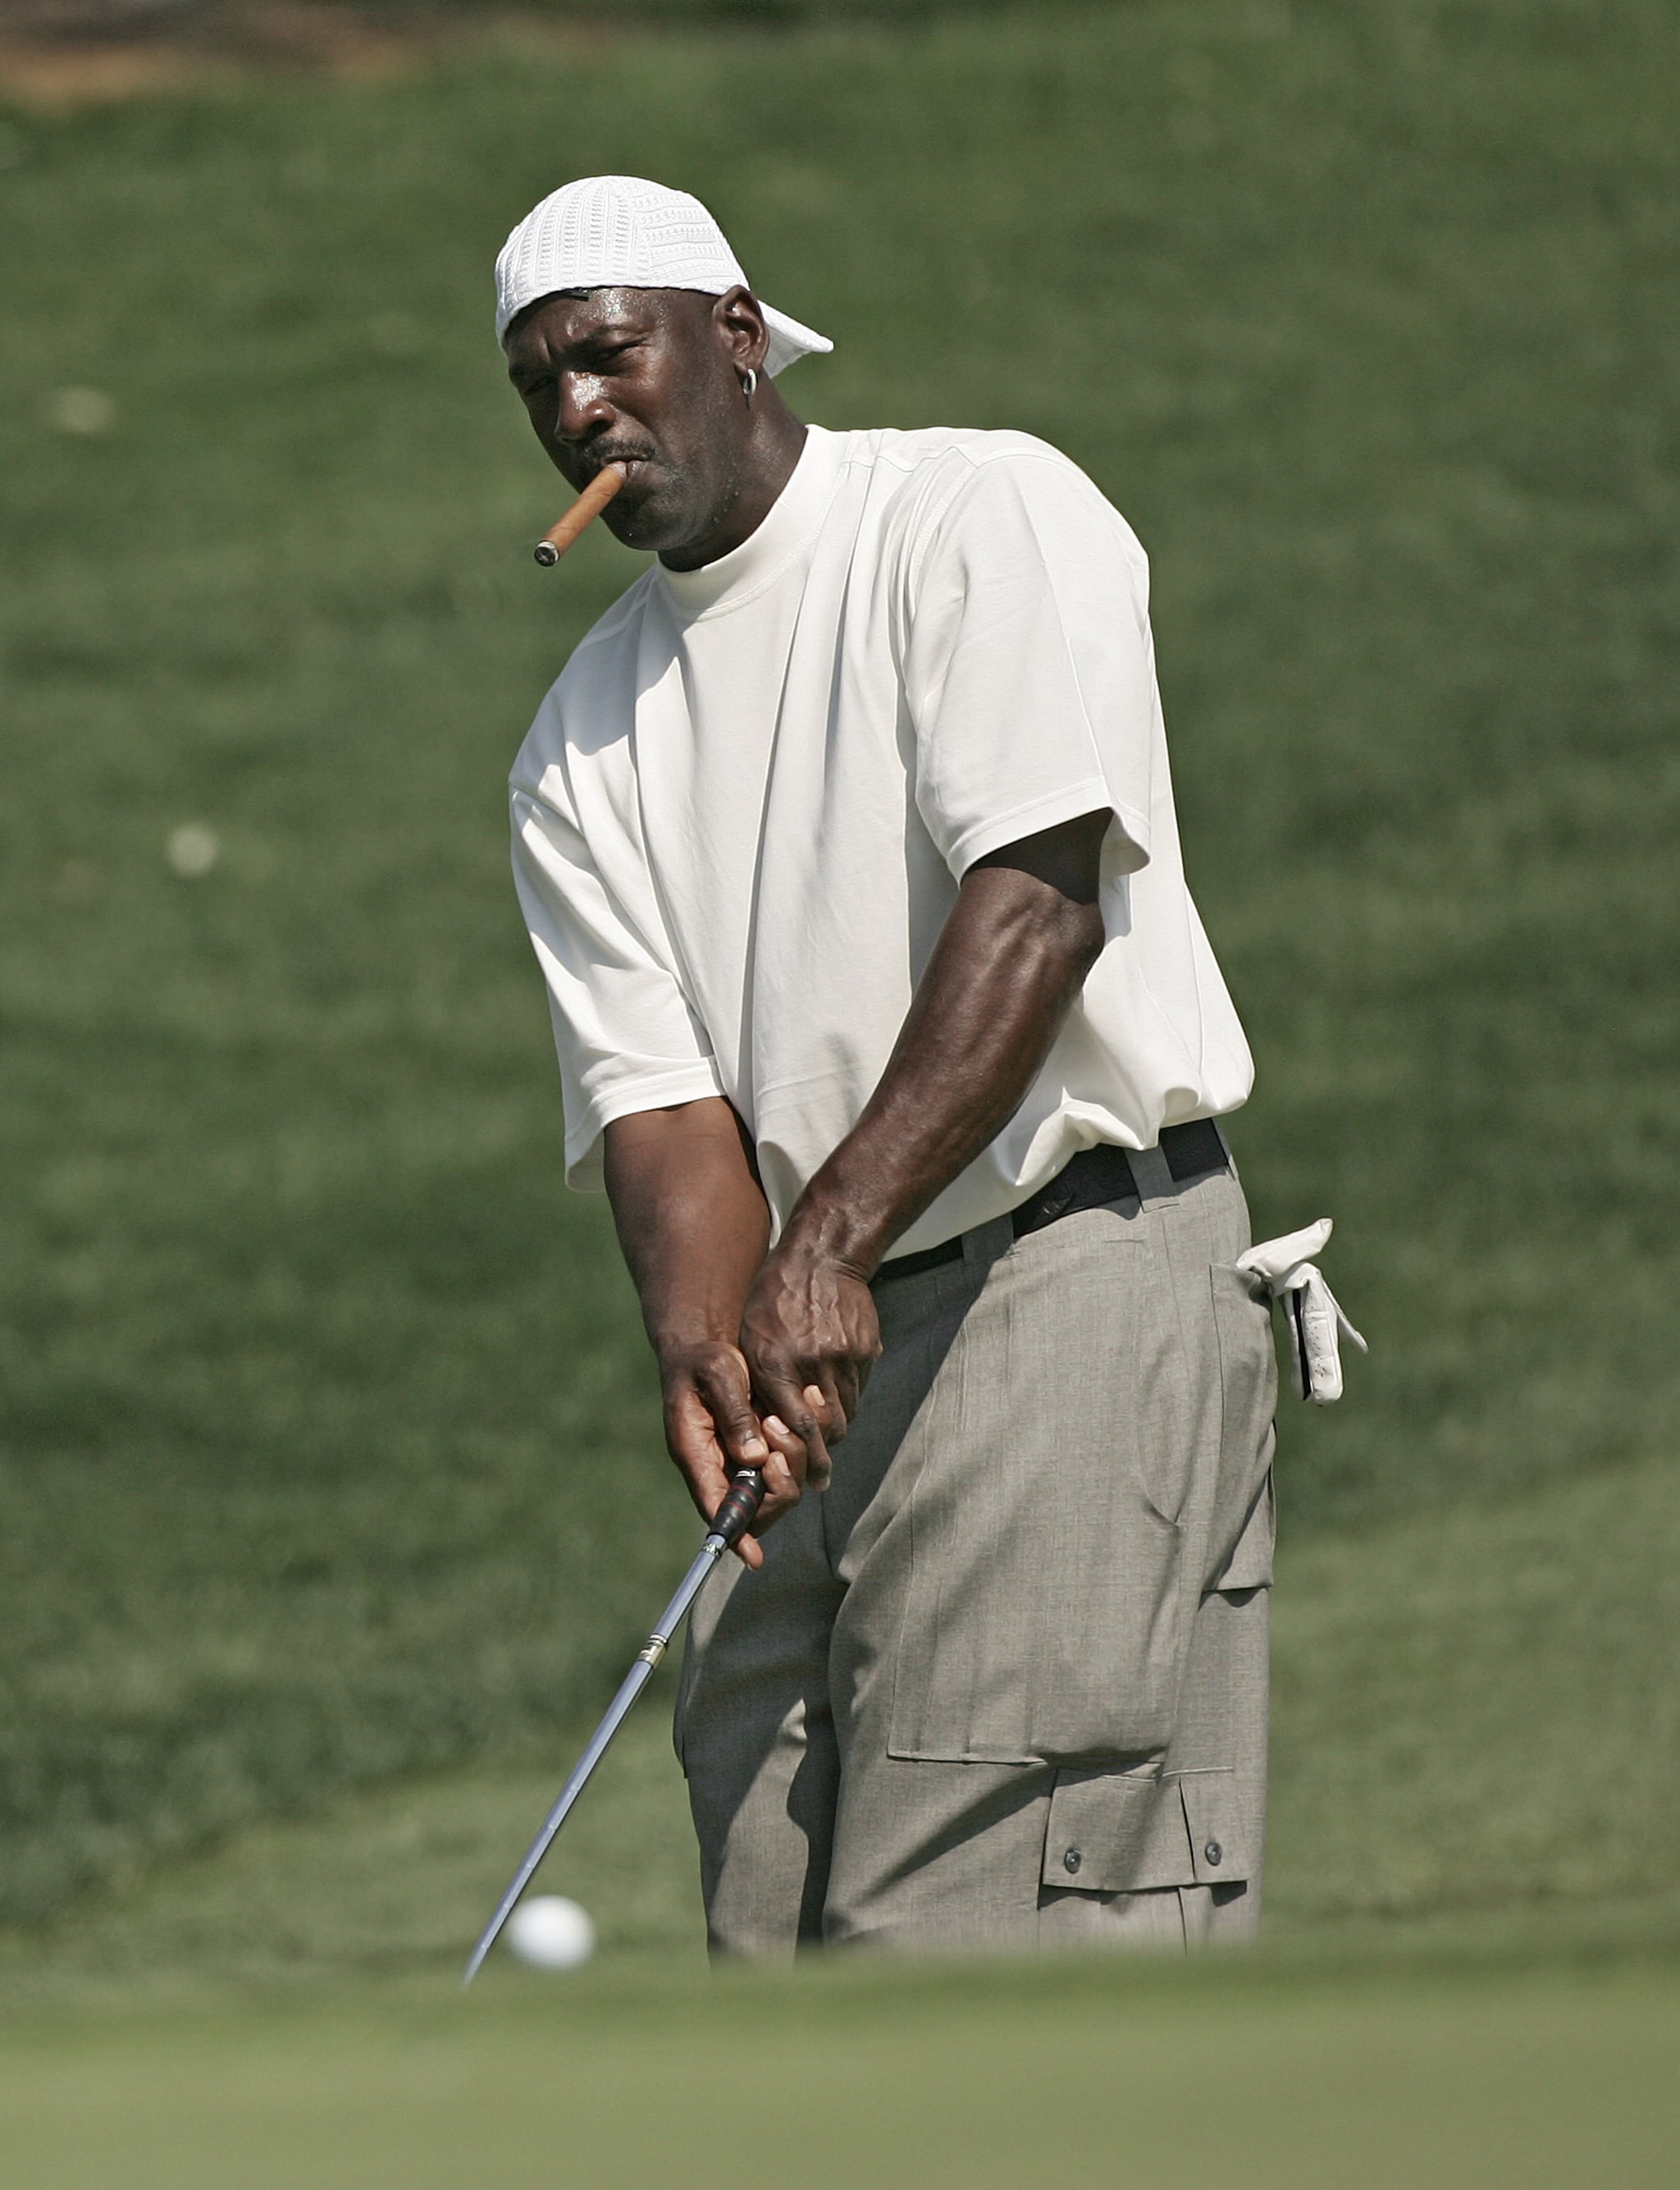 Vandre jazz kindben When Michael Jordan's Cargo Pants and Mock Turtleneck Were an Absolute Vibe  | From Dad 'Fits to Swag 'Fits: A Look at Michael Jordan's Iconic  Golf-Course Style | POPSUGAR Fashion Photo 8